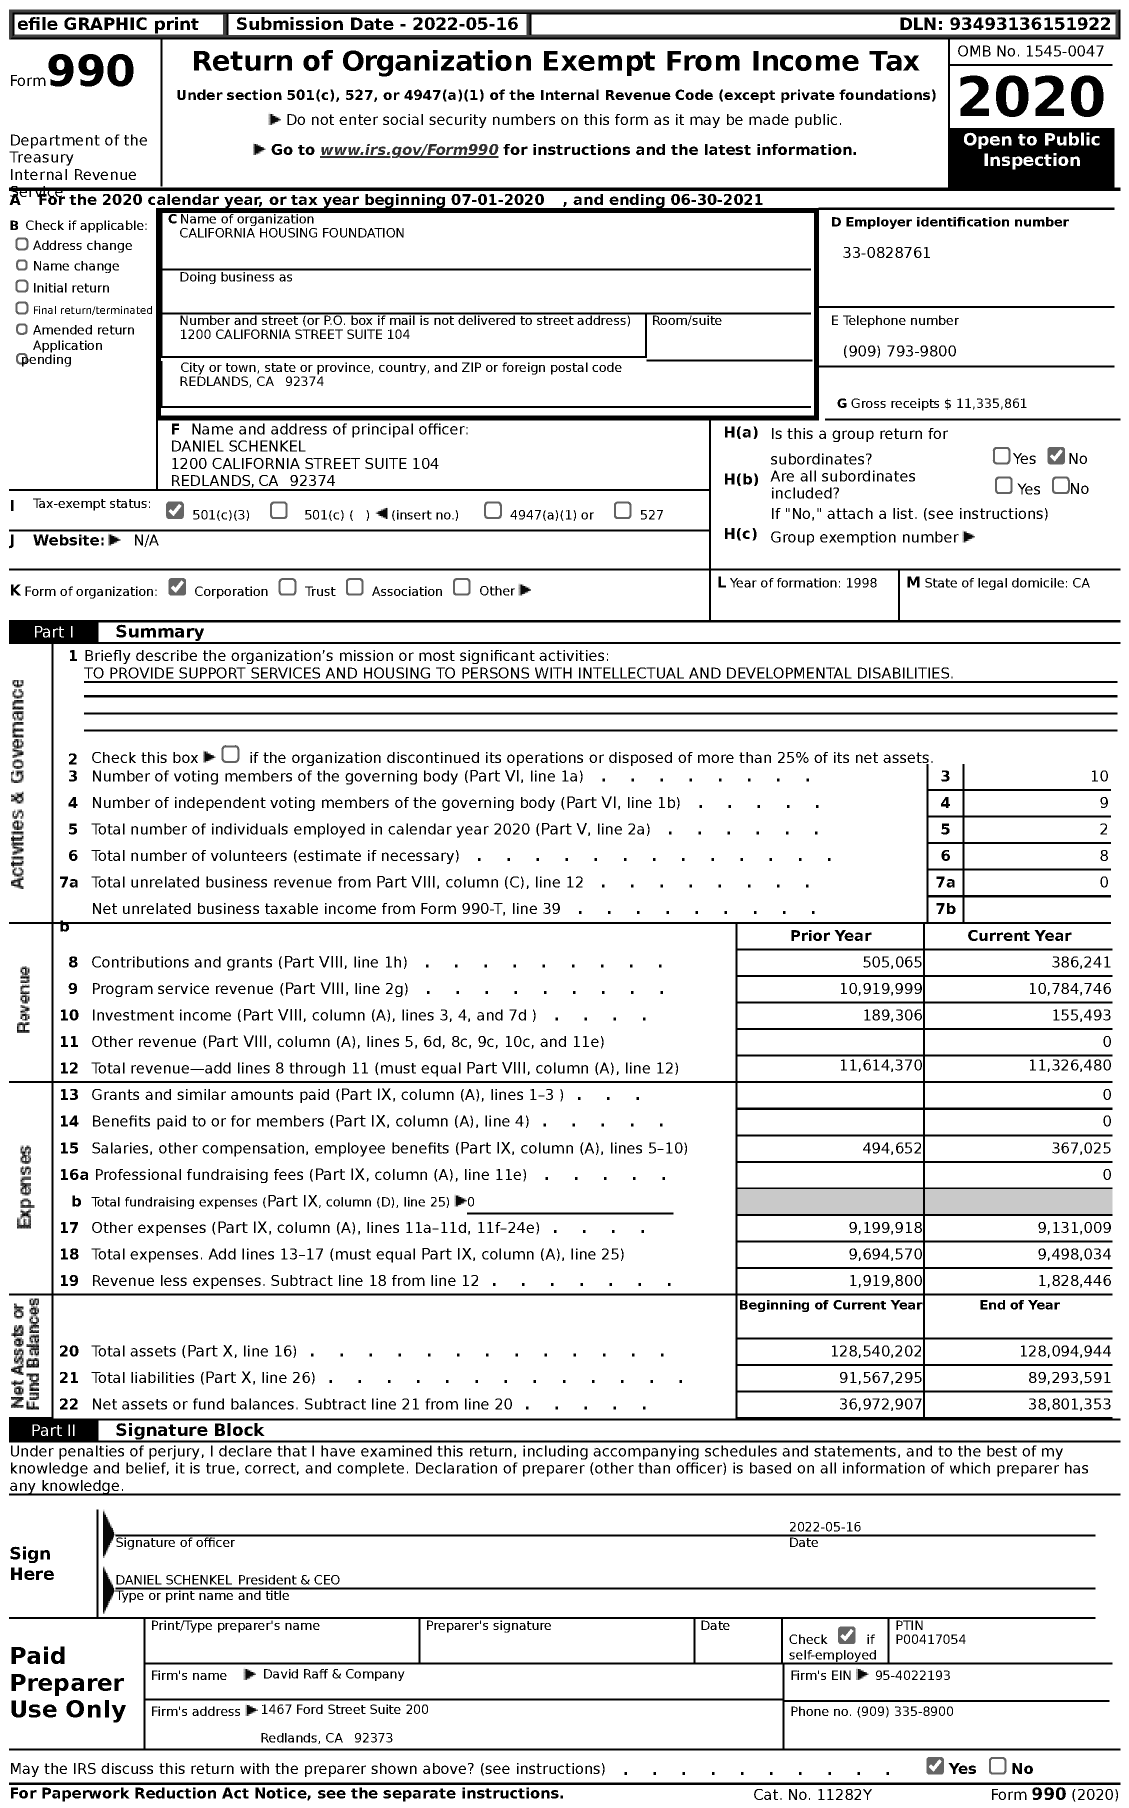 Image of first page of 2020 Form 990 for California Housing Foundation (CHF)